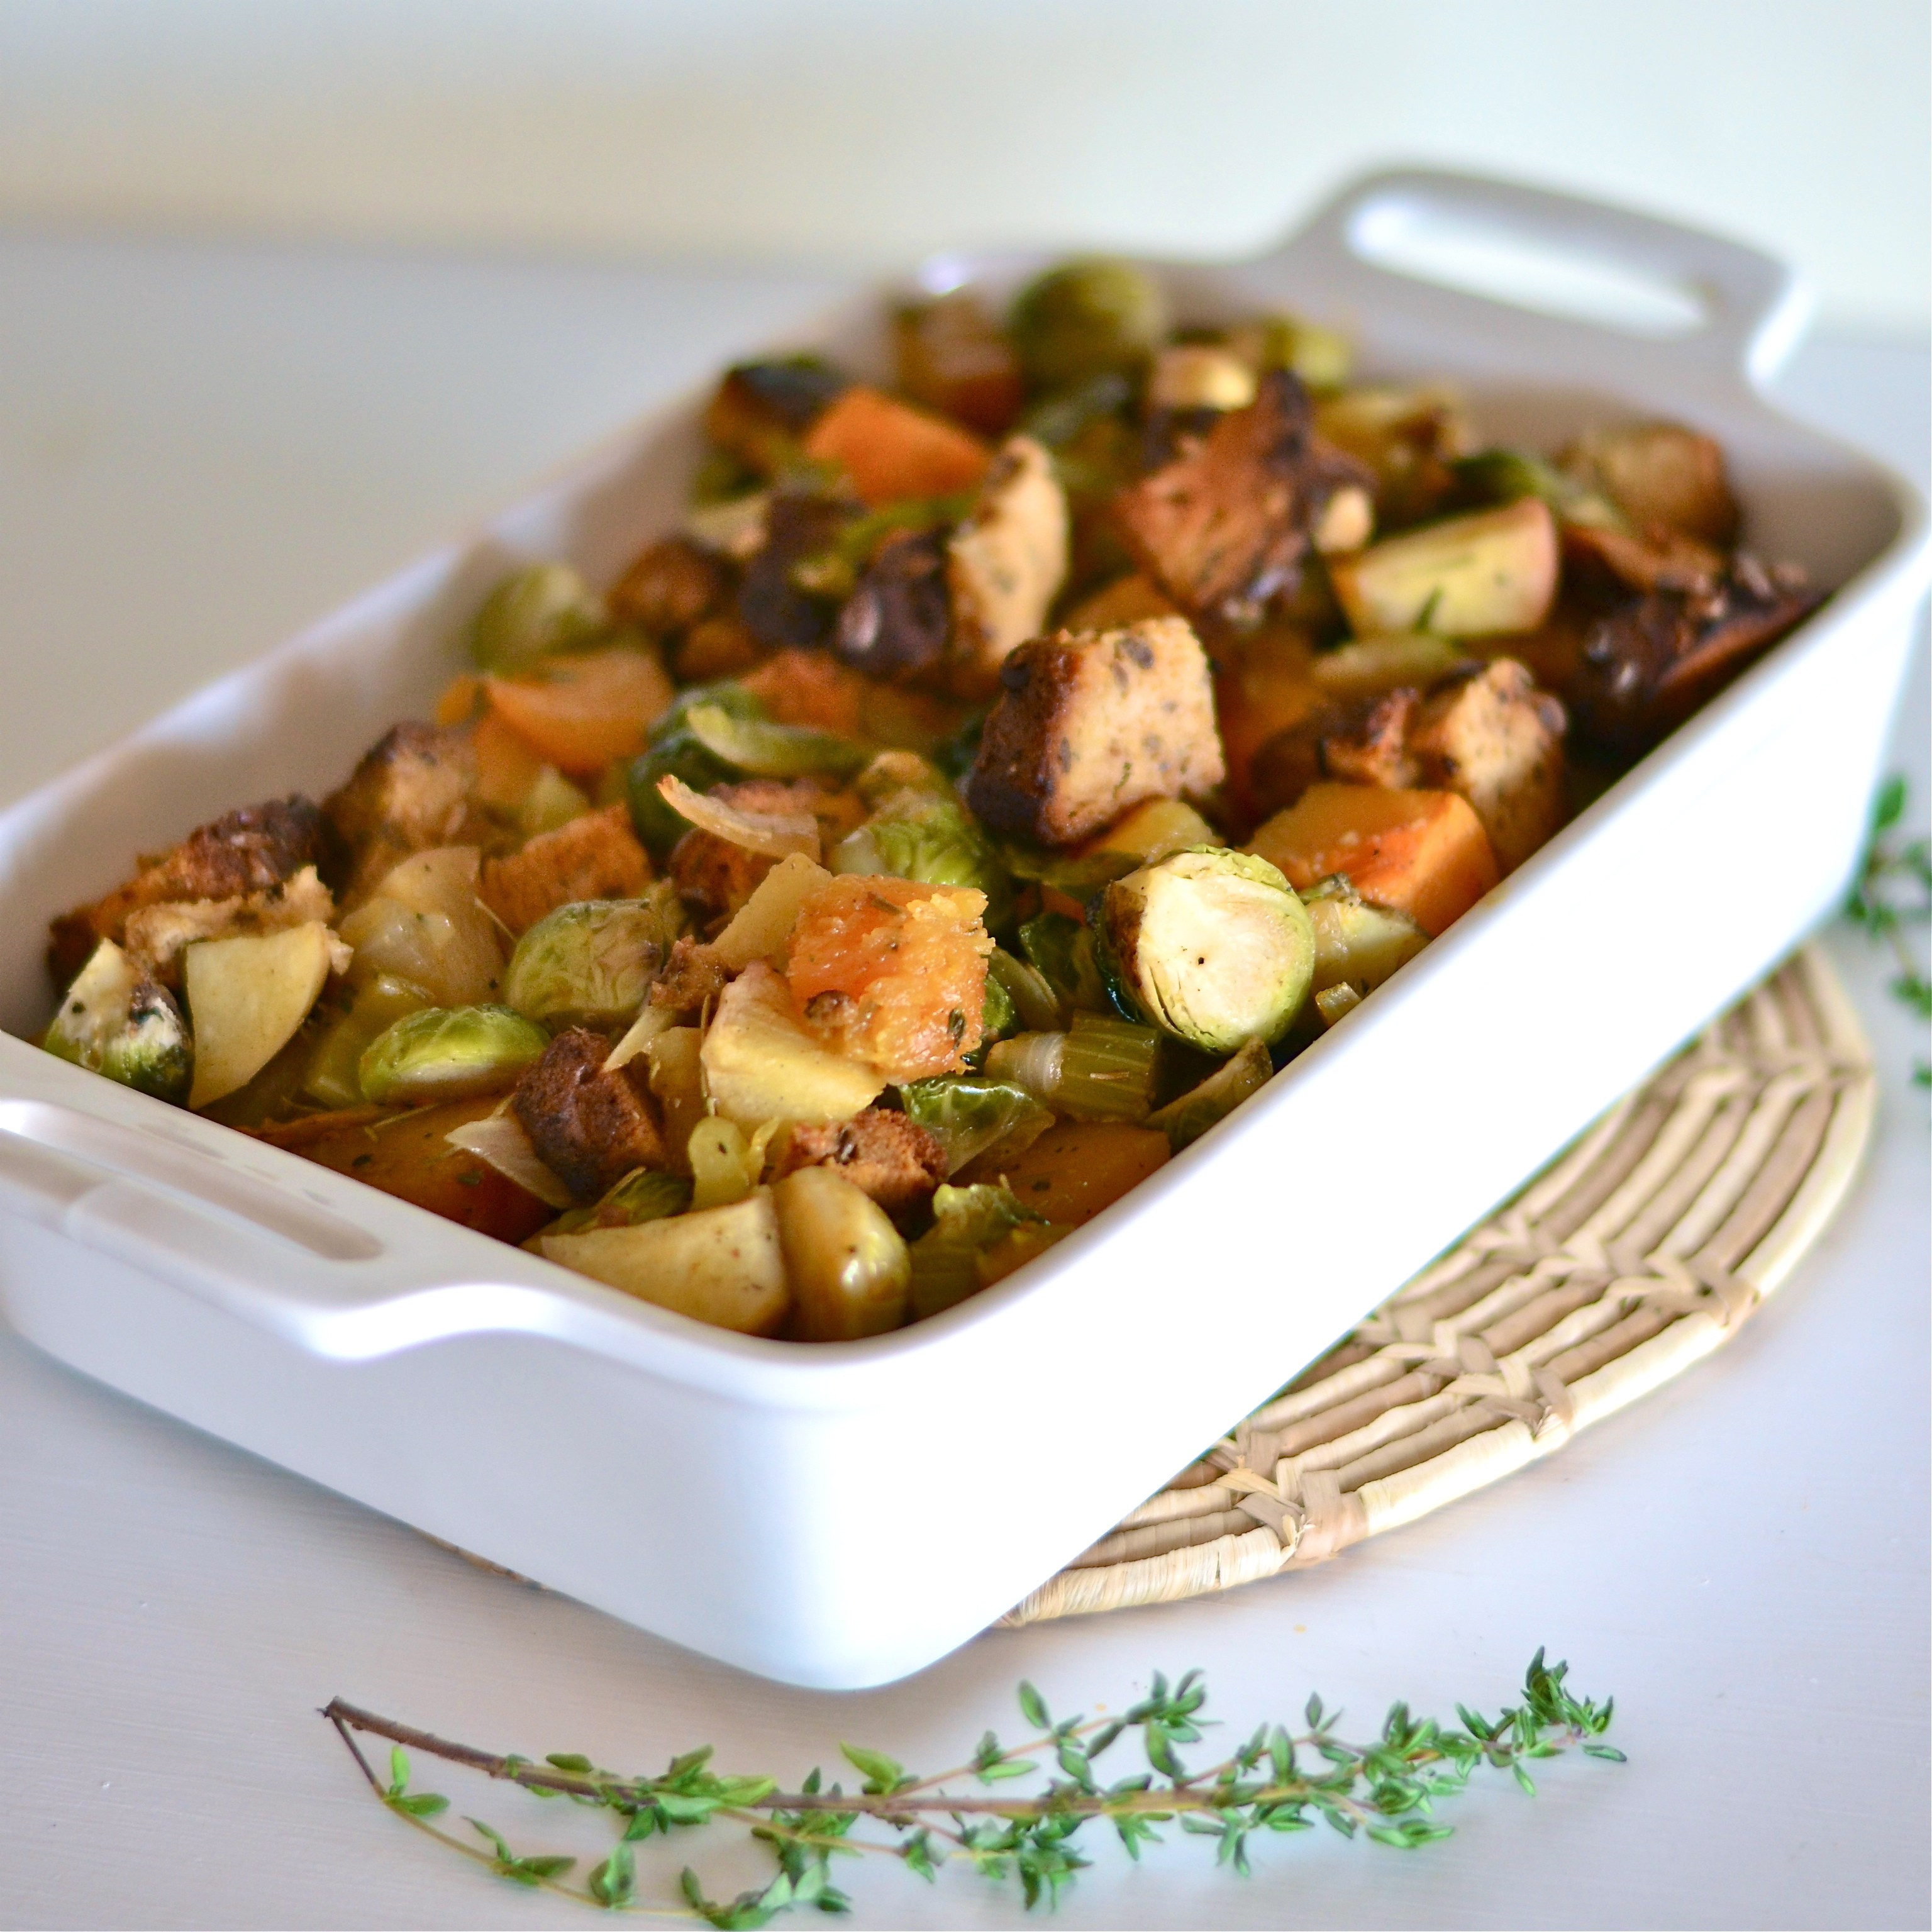 Healthy Stuffing Recipes For Thanksgiving
 Healthy Stuffing Recipe